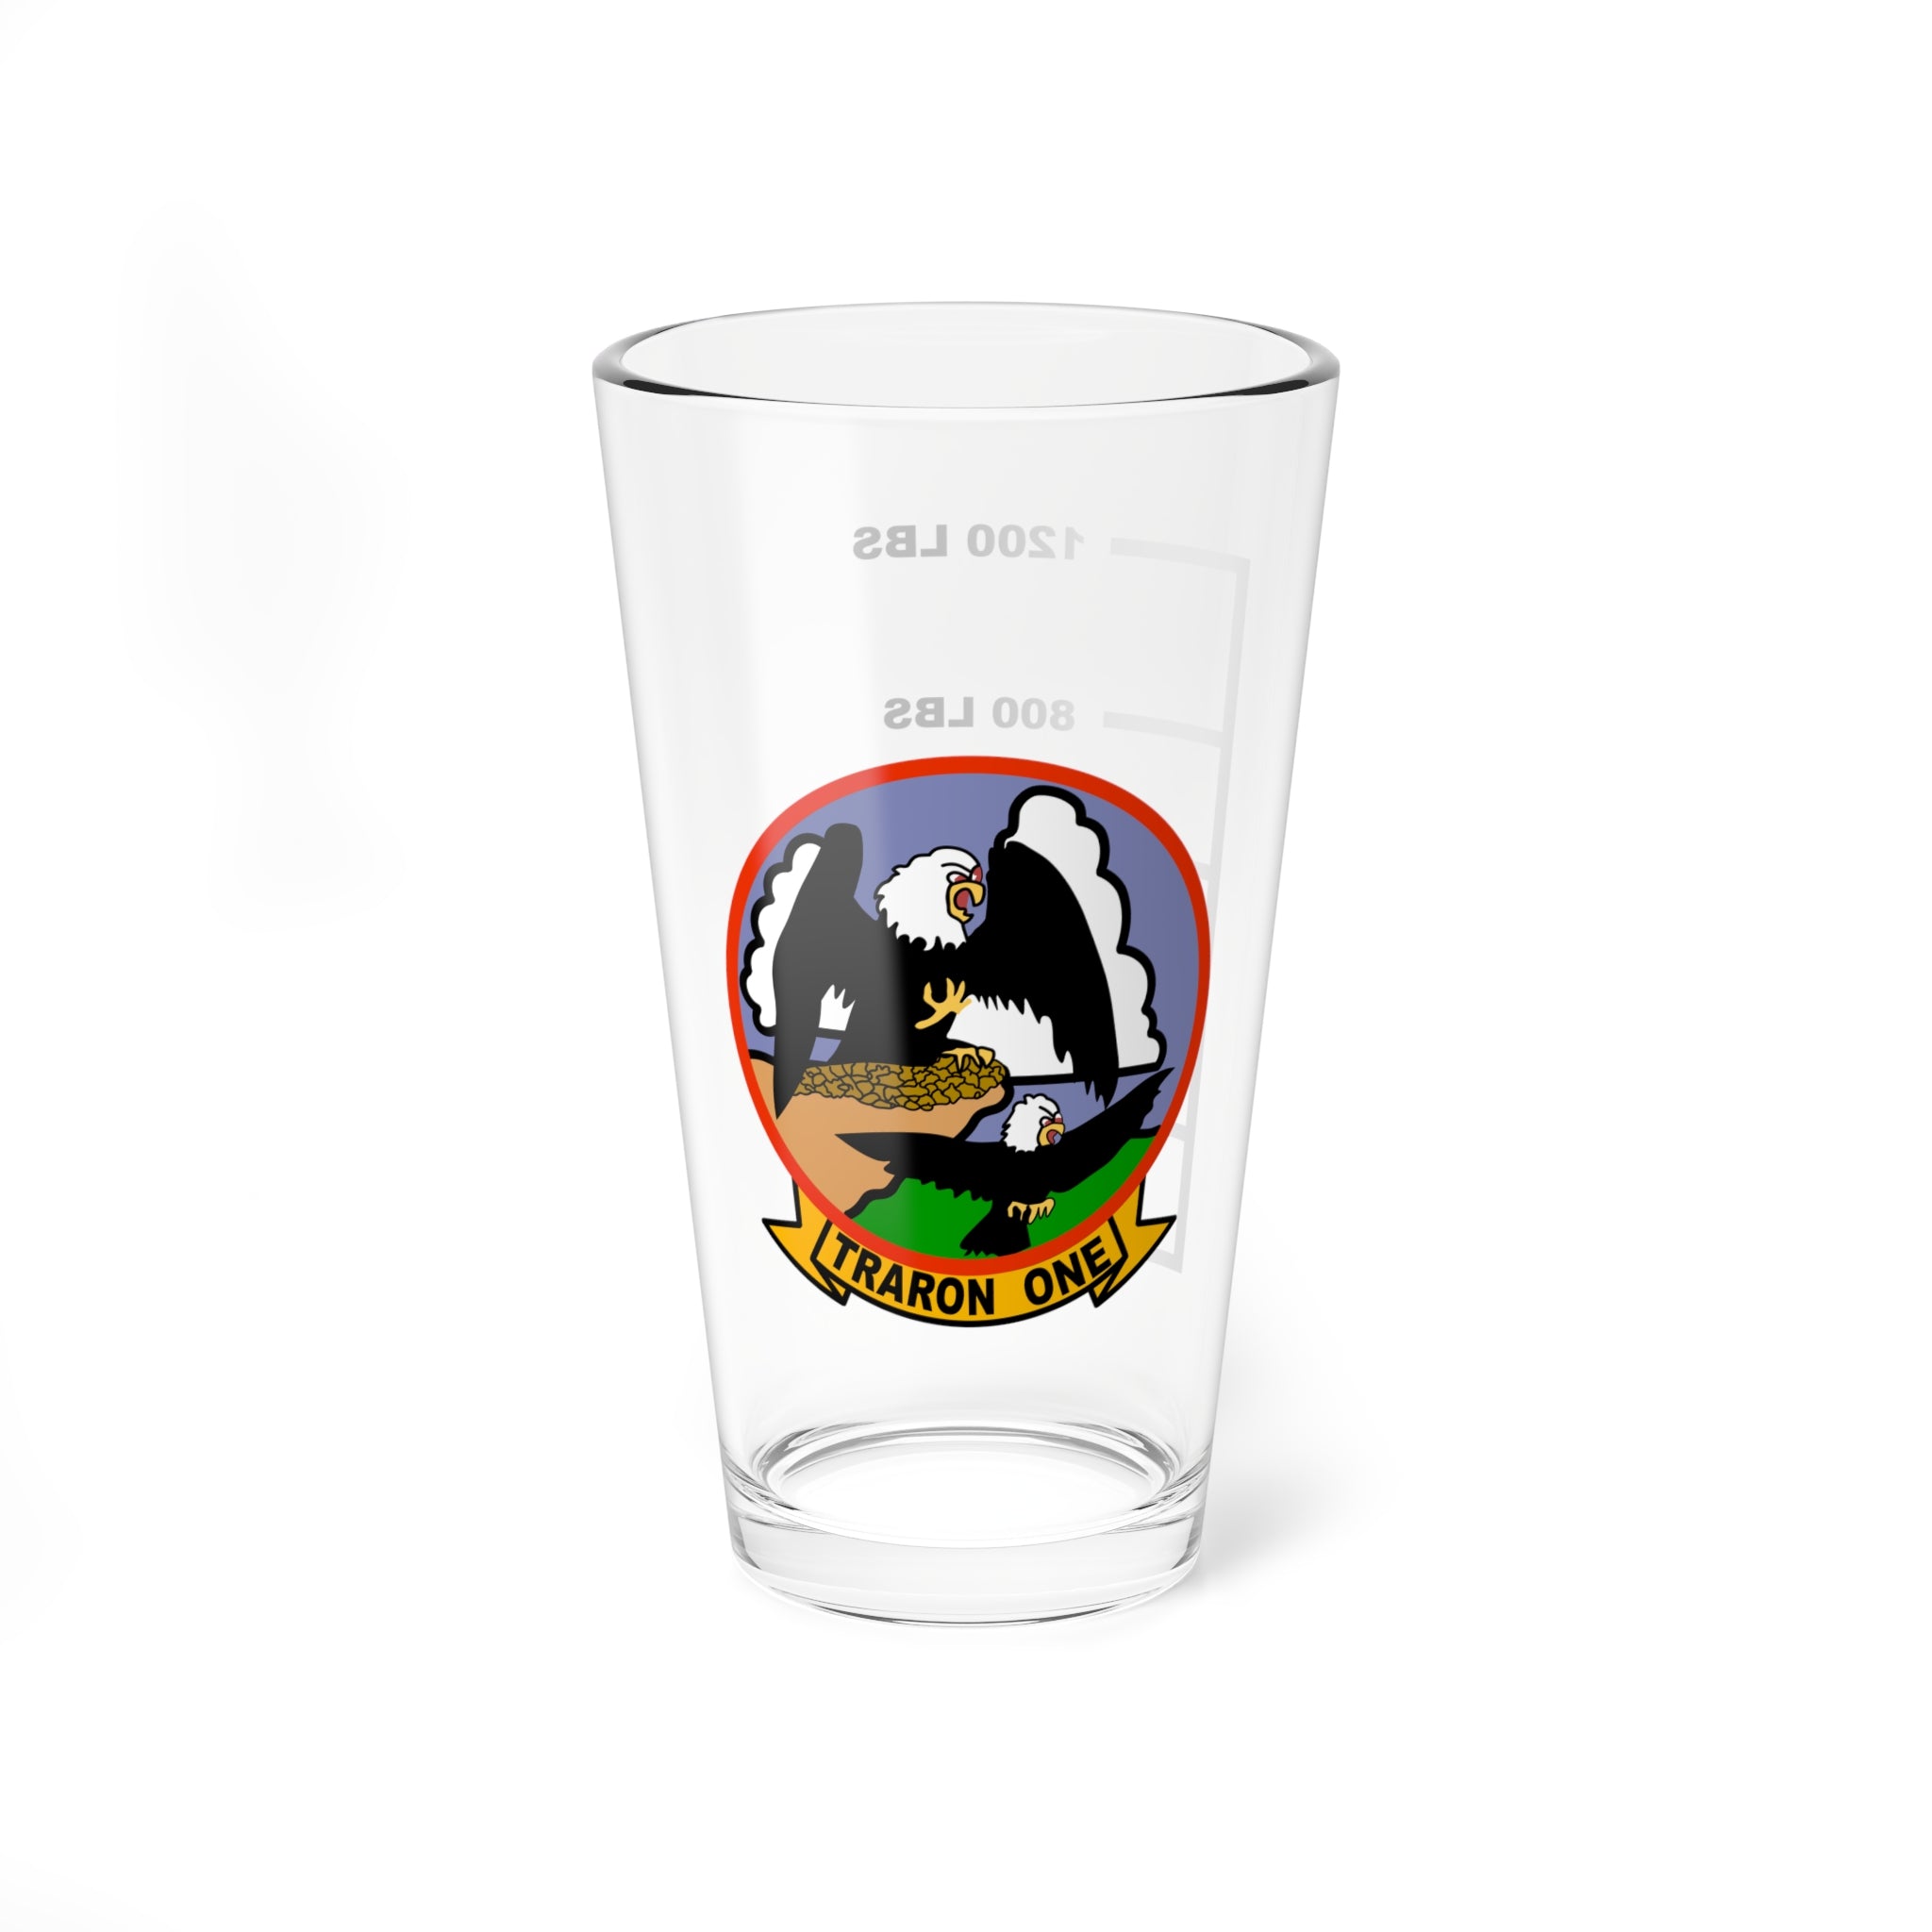 VT-1 "Eagles" Fuel Low Pint Glass, Navy Training Squadron flying the T-34B Mentor